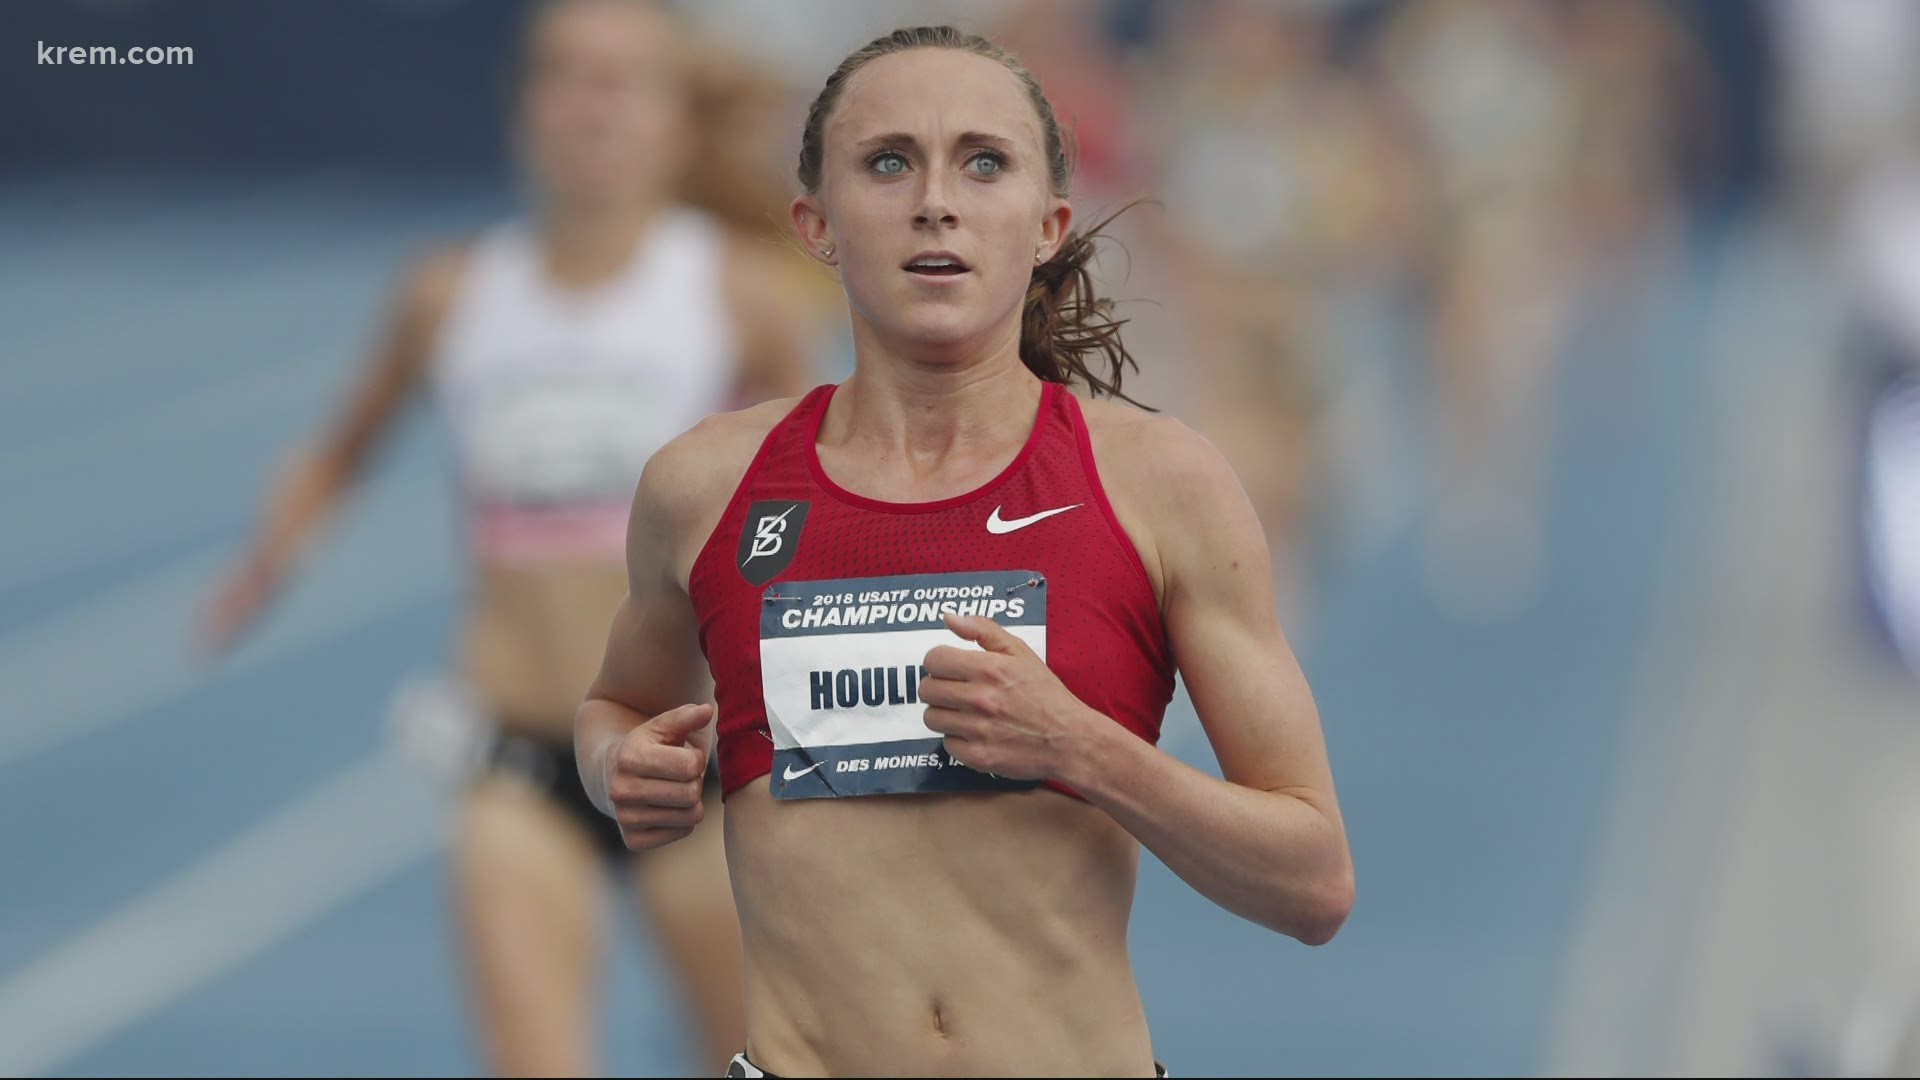 Distance runner Shelby Houlihan said despite pleading her case that the nandrolone in her system may have come from a tainted pork burrito, her appeal was denied.